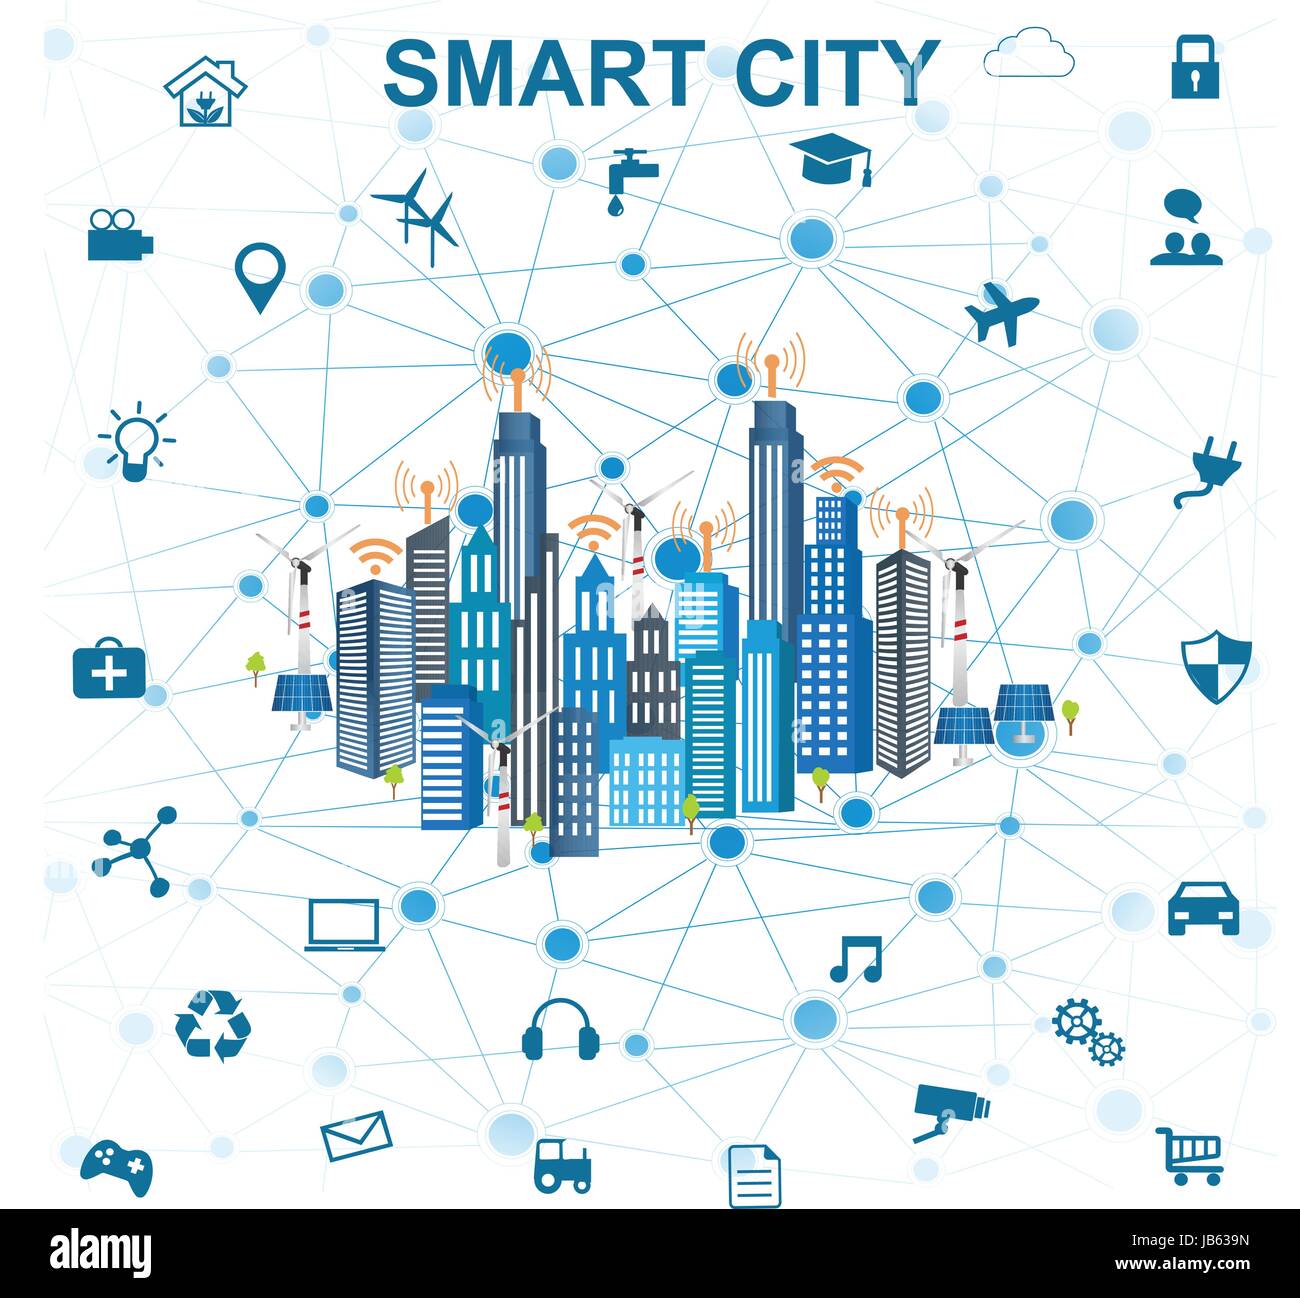 Smart city concept with different icon and elements. Modern city design with future technology for living. Illustration of innovations and Internet of Stock Vector